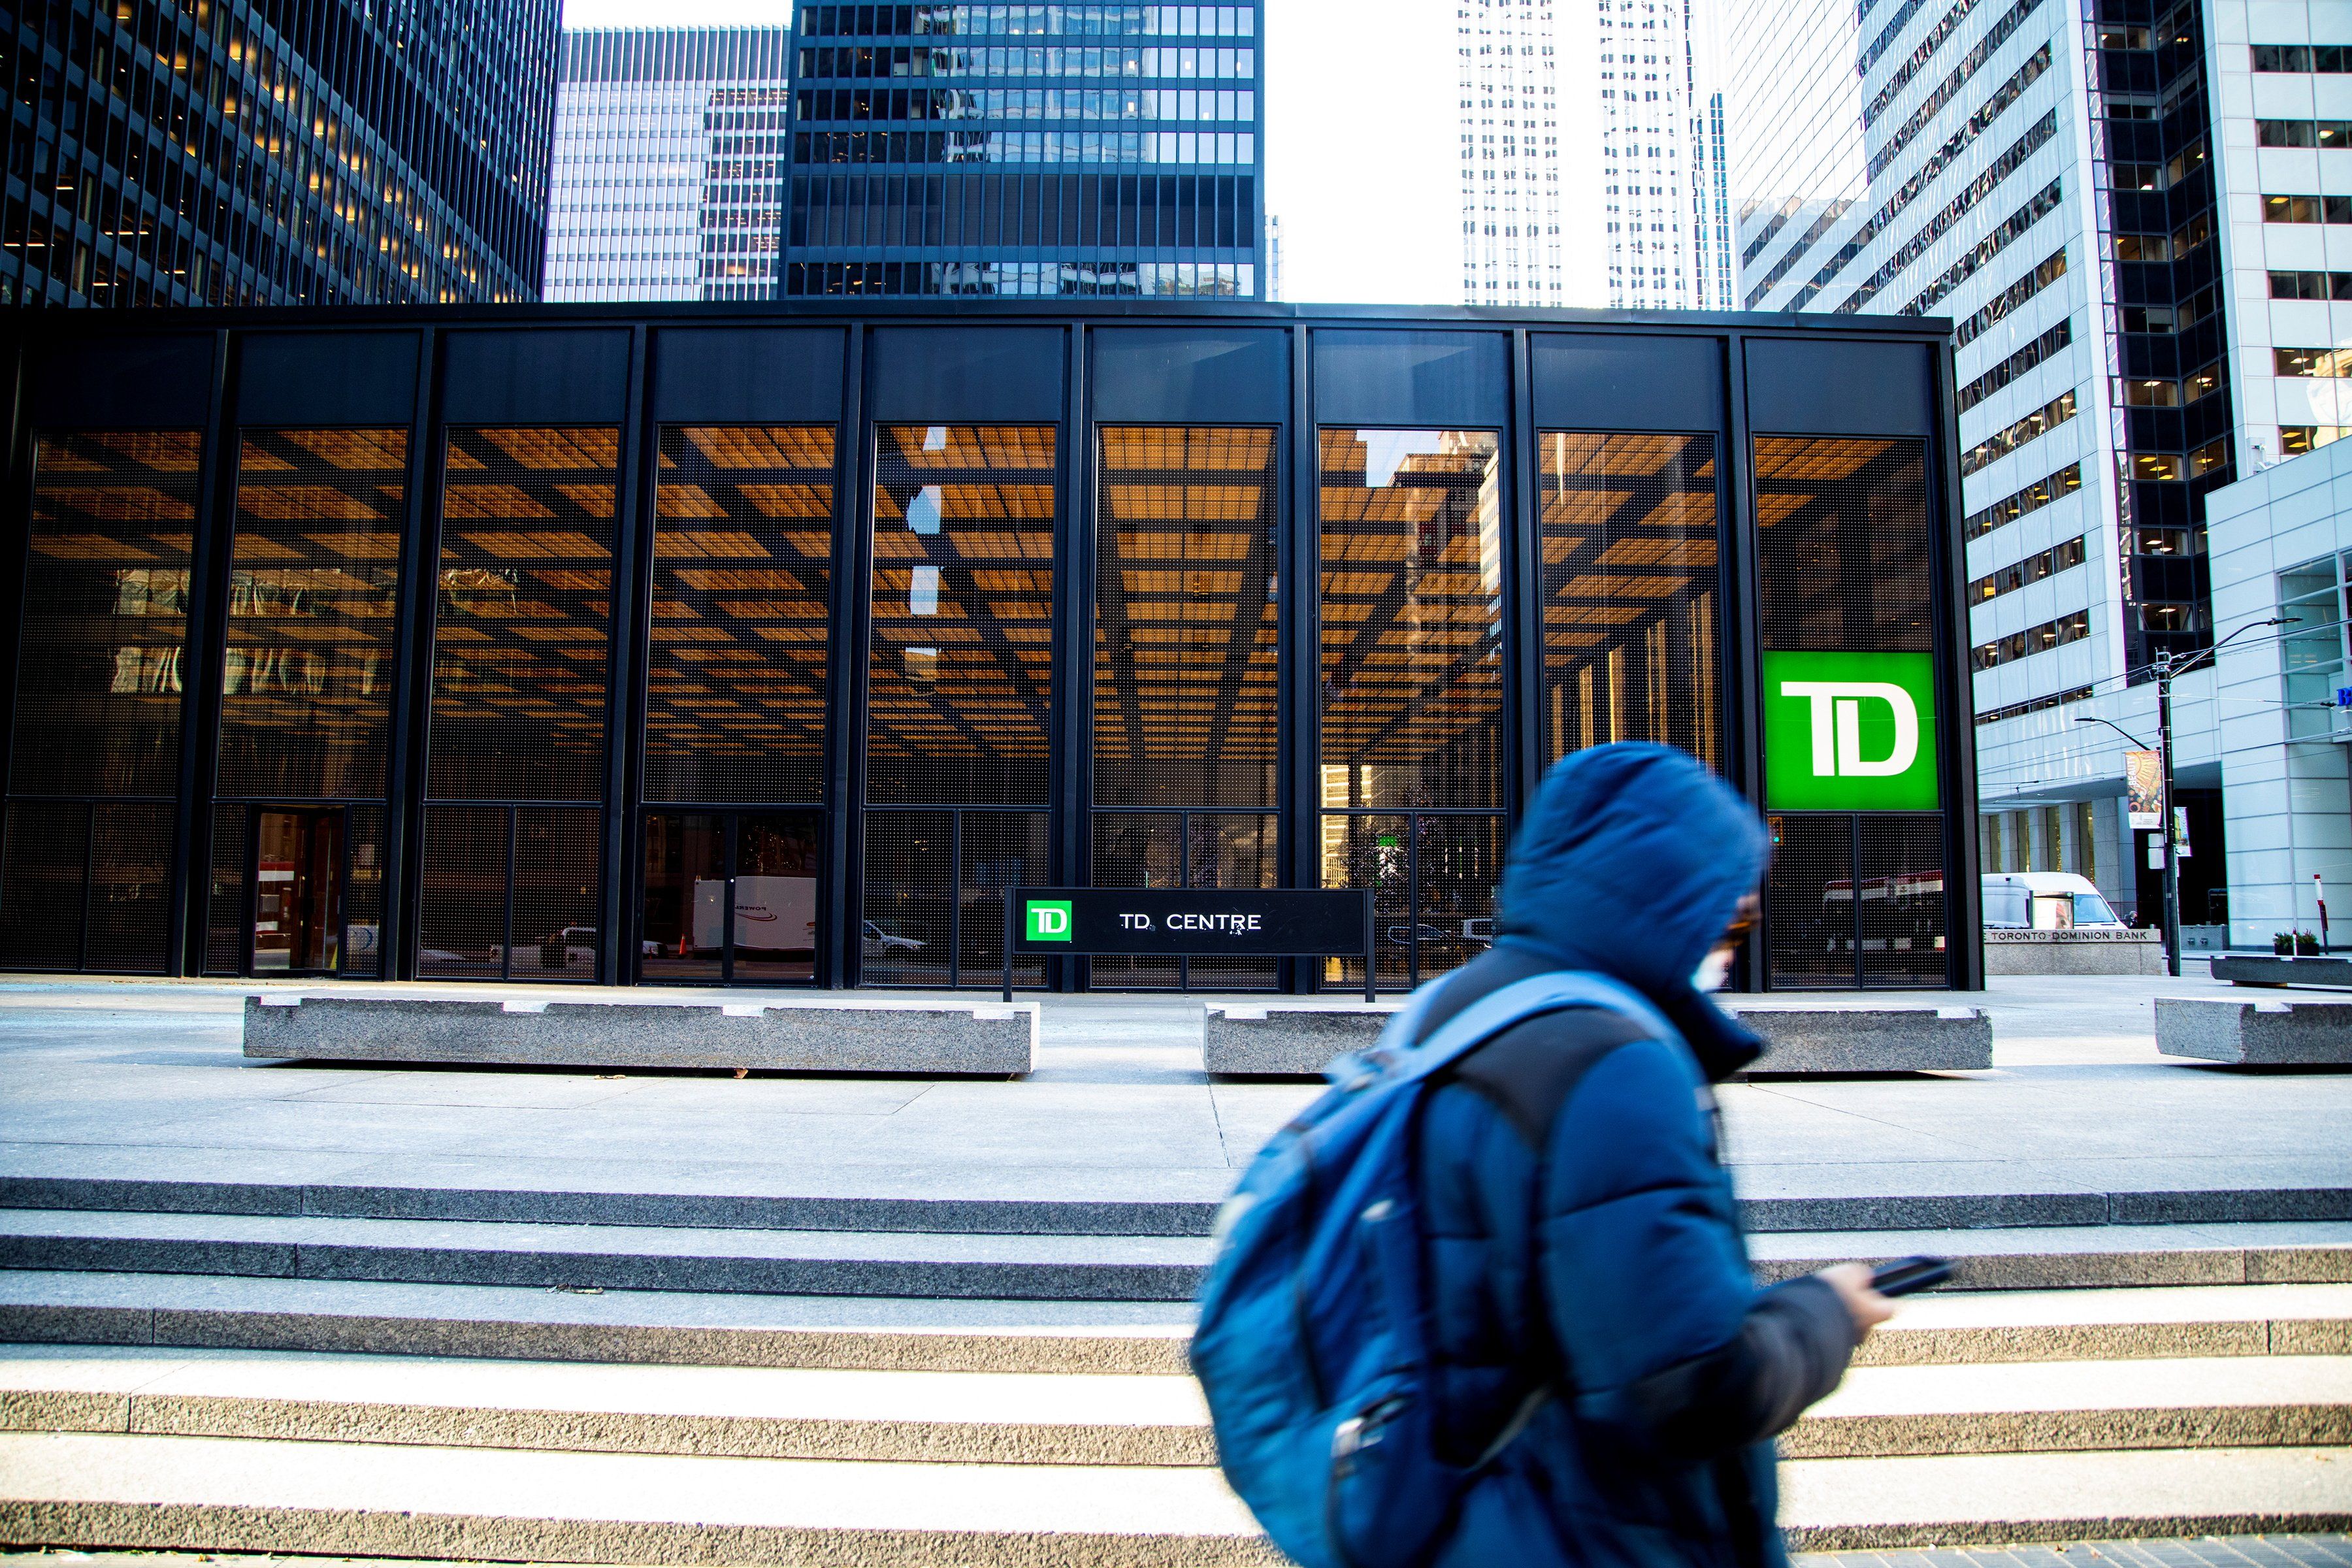 A person walks past a sign for TD Canada Trust in Toronto, Ontario.